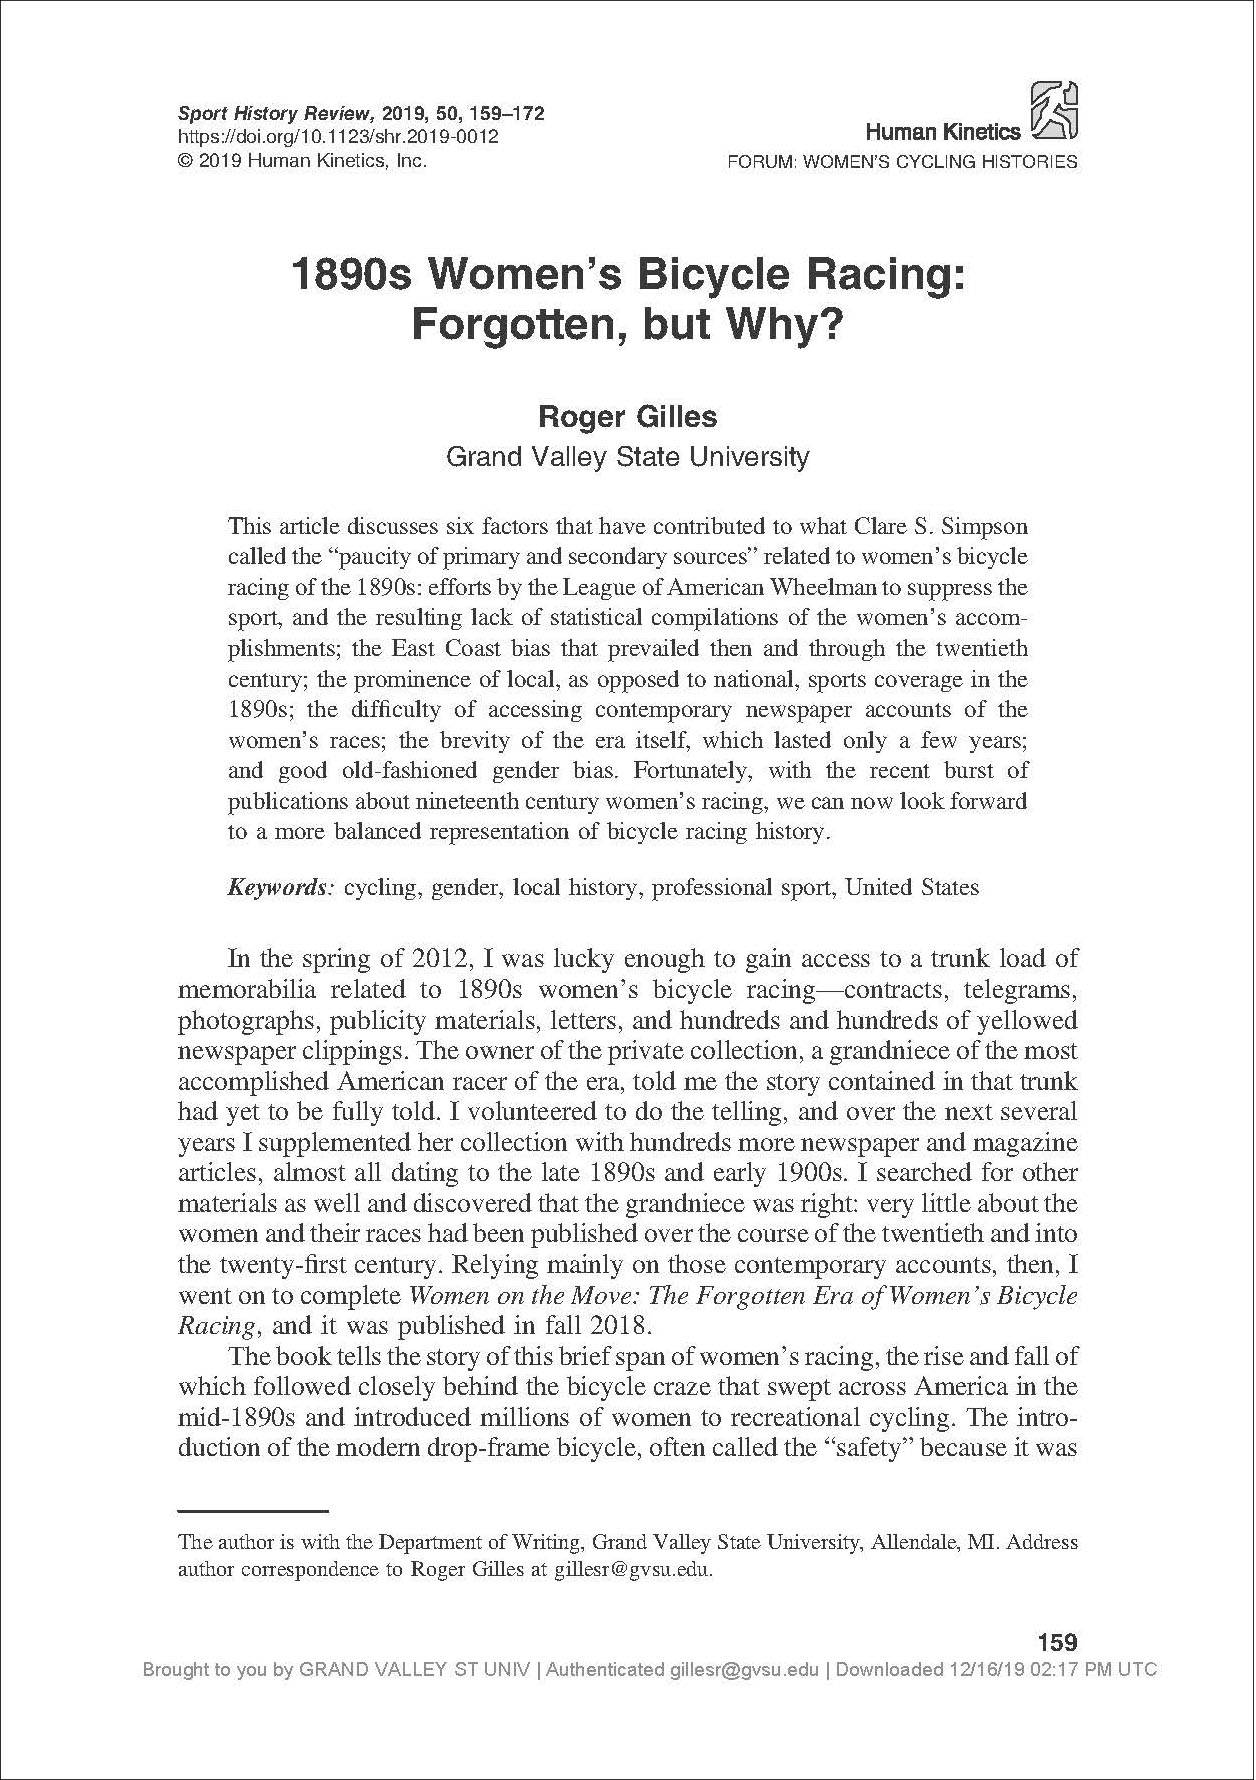 First page of article by Roger Gilles